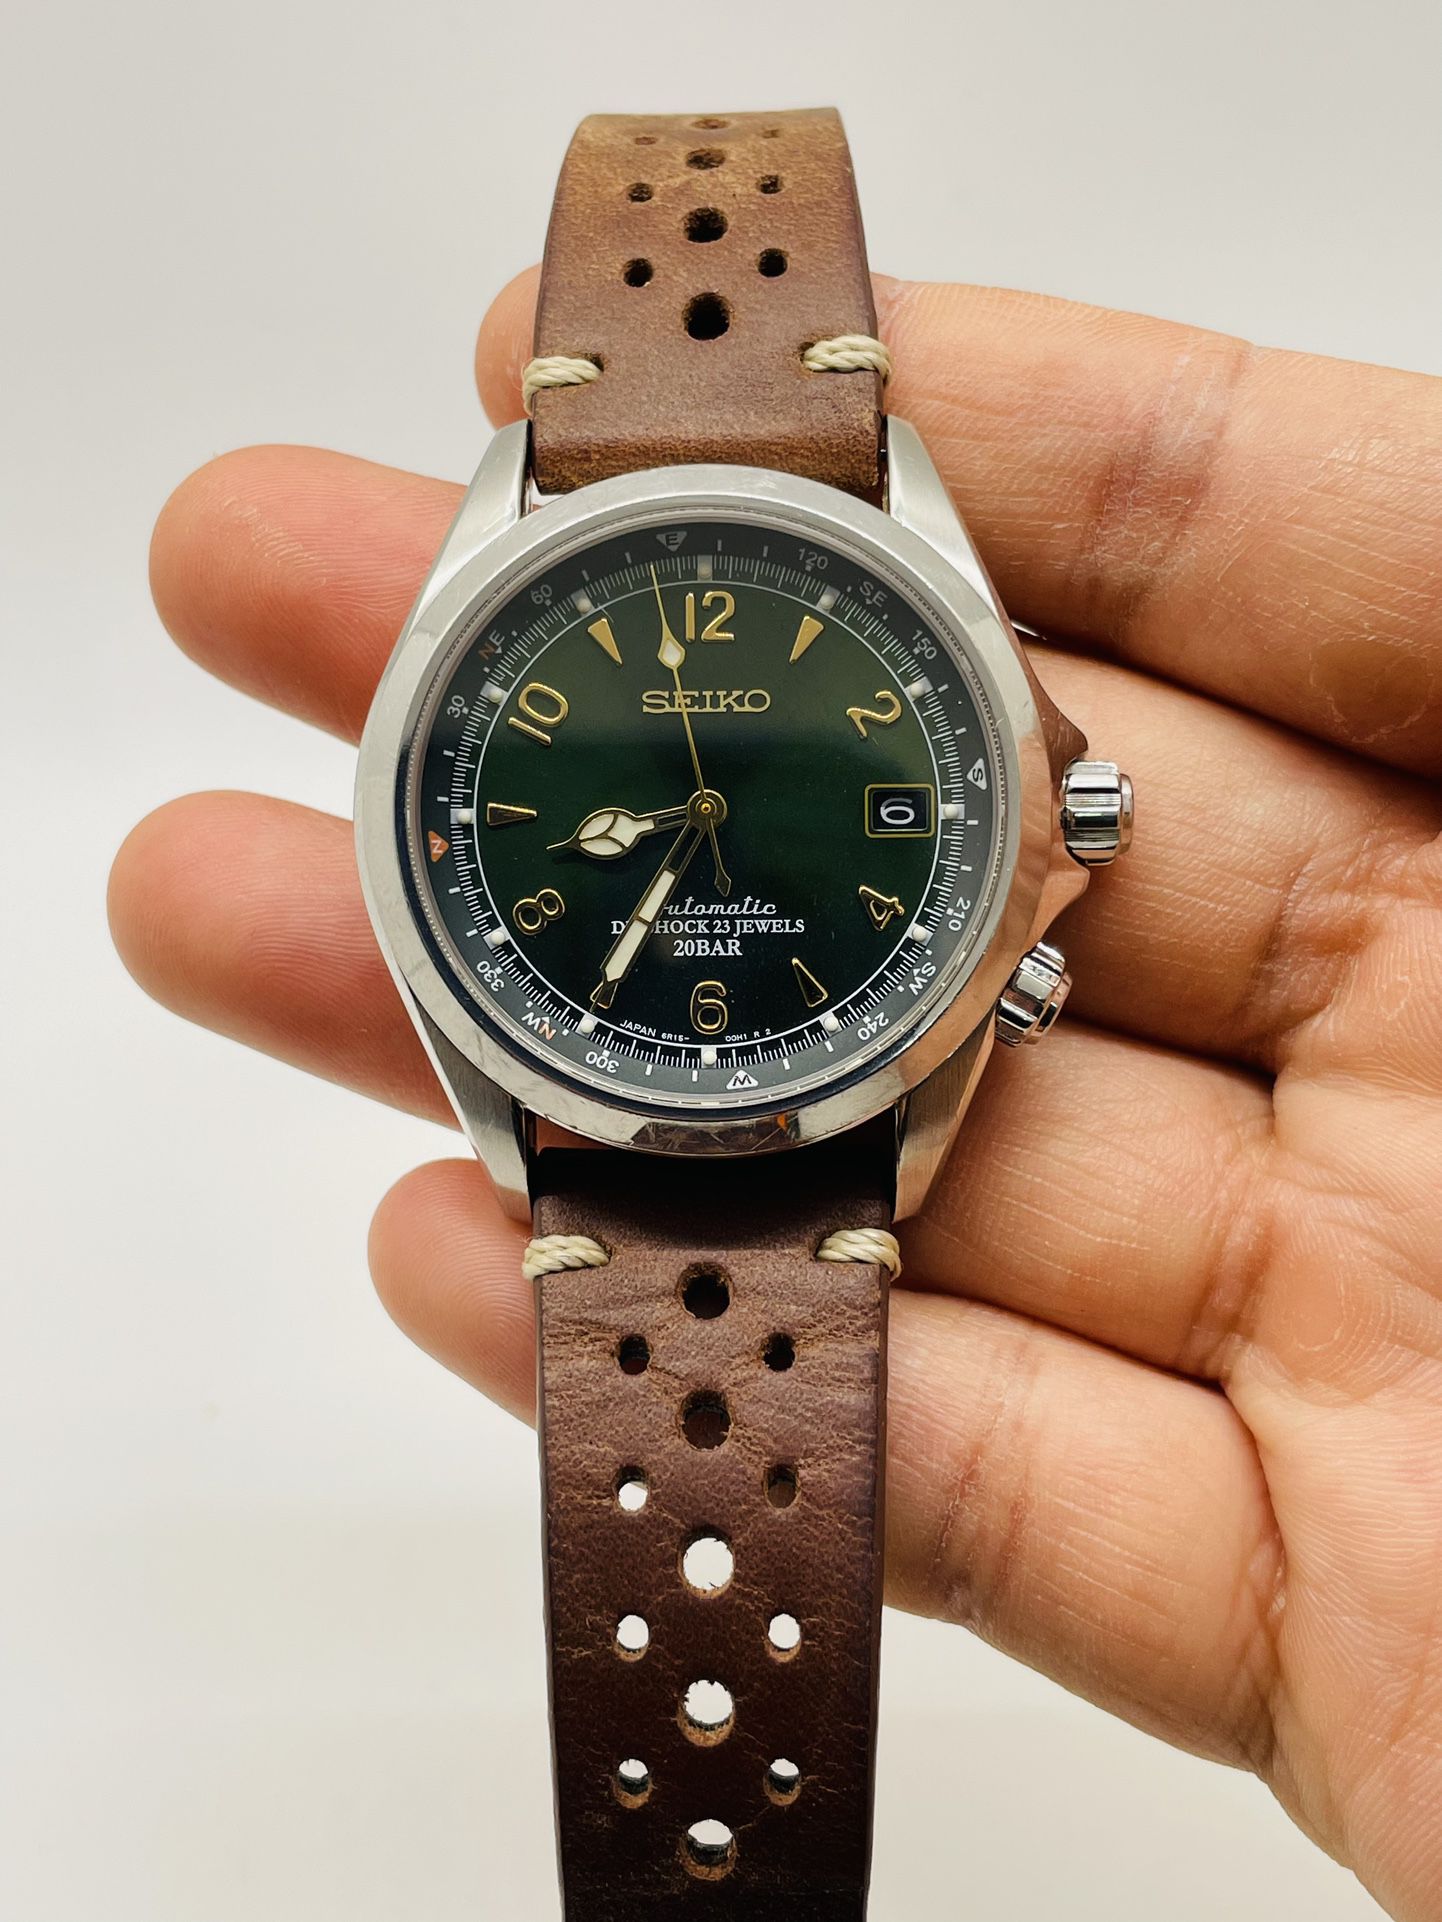 Seiko Alpinist SARB017 Watch Green Dial for Sale in Fort Lauderdale, FL -  OfferUp